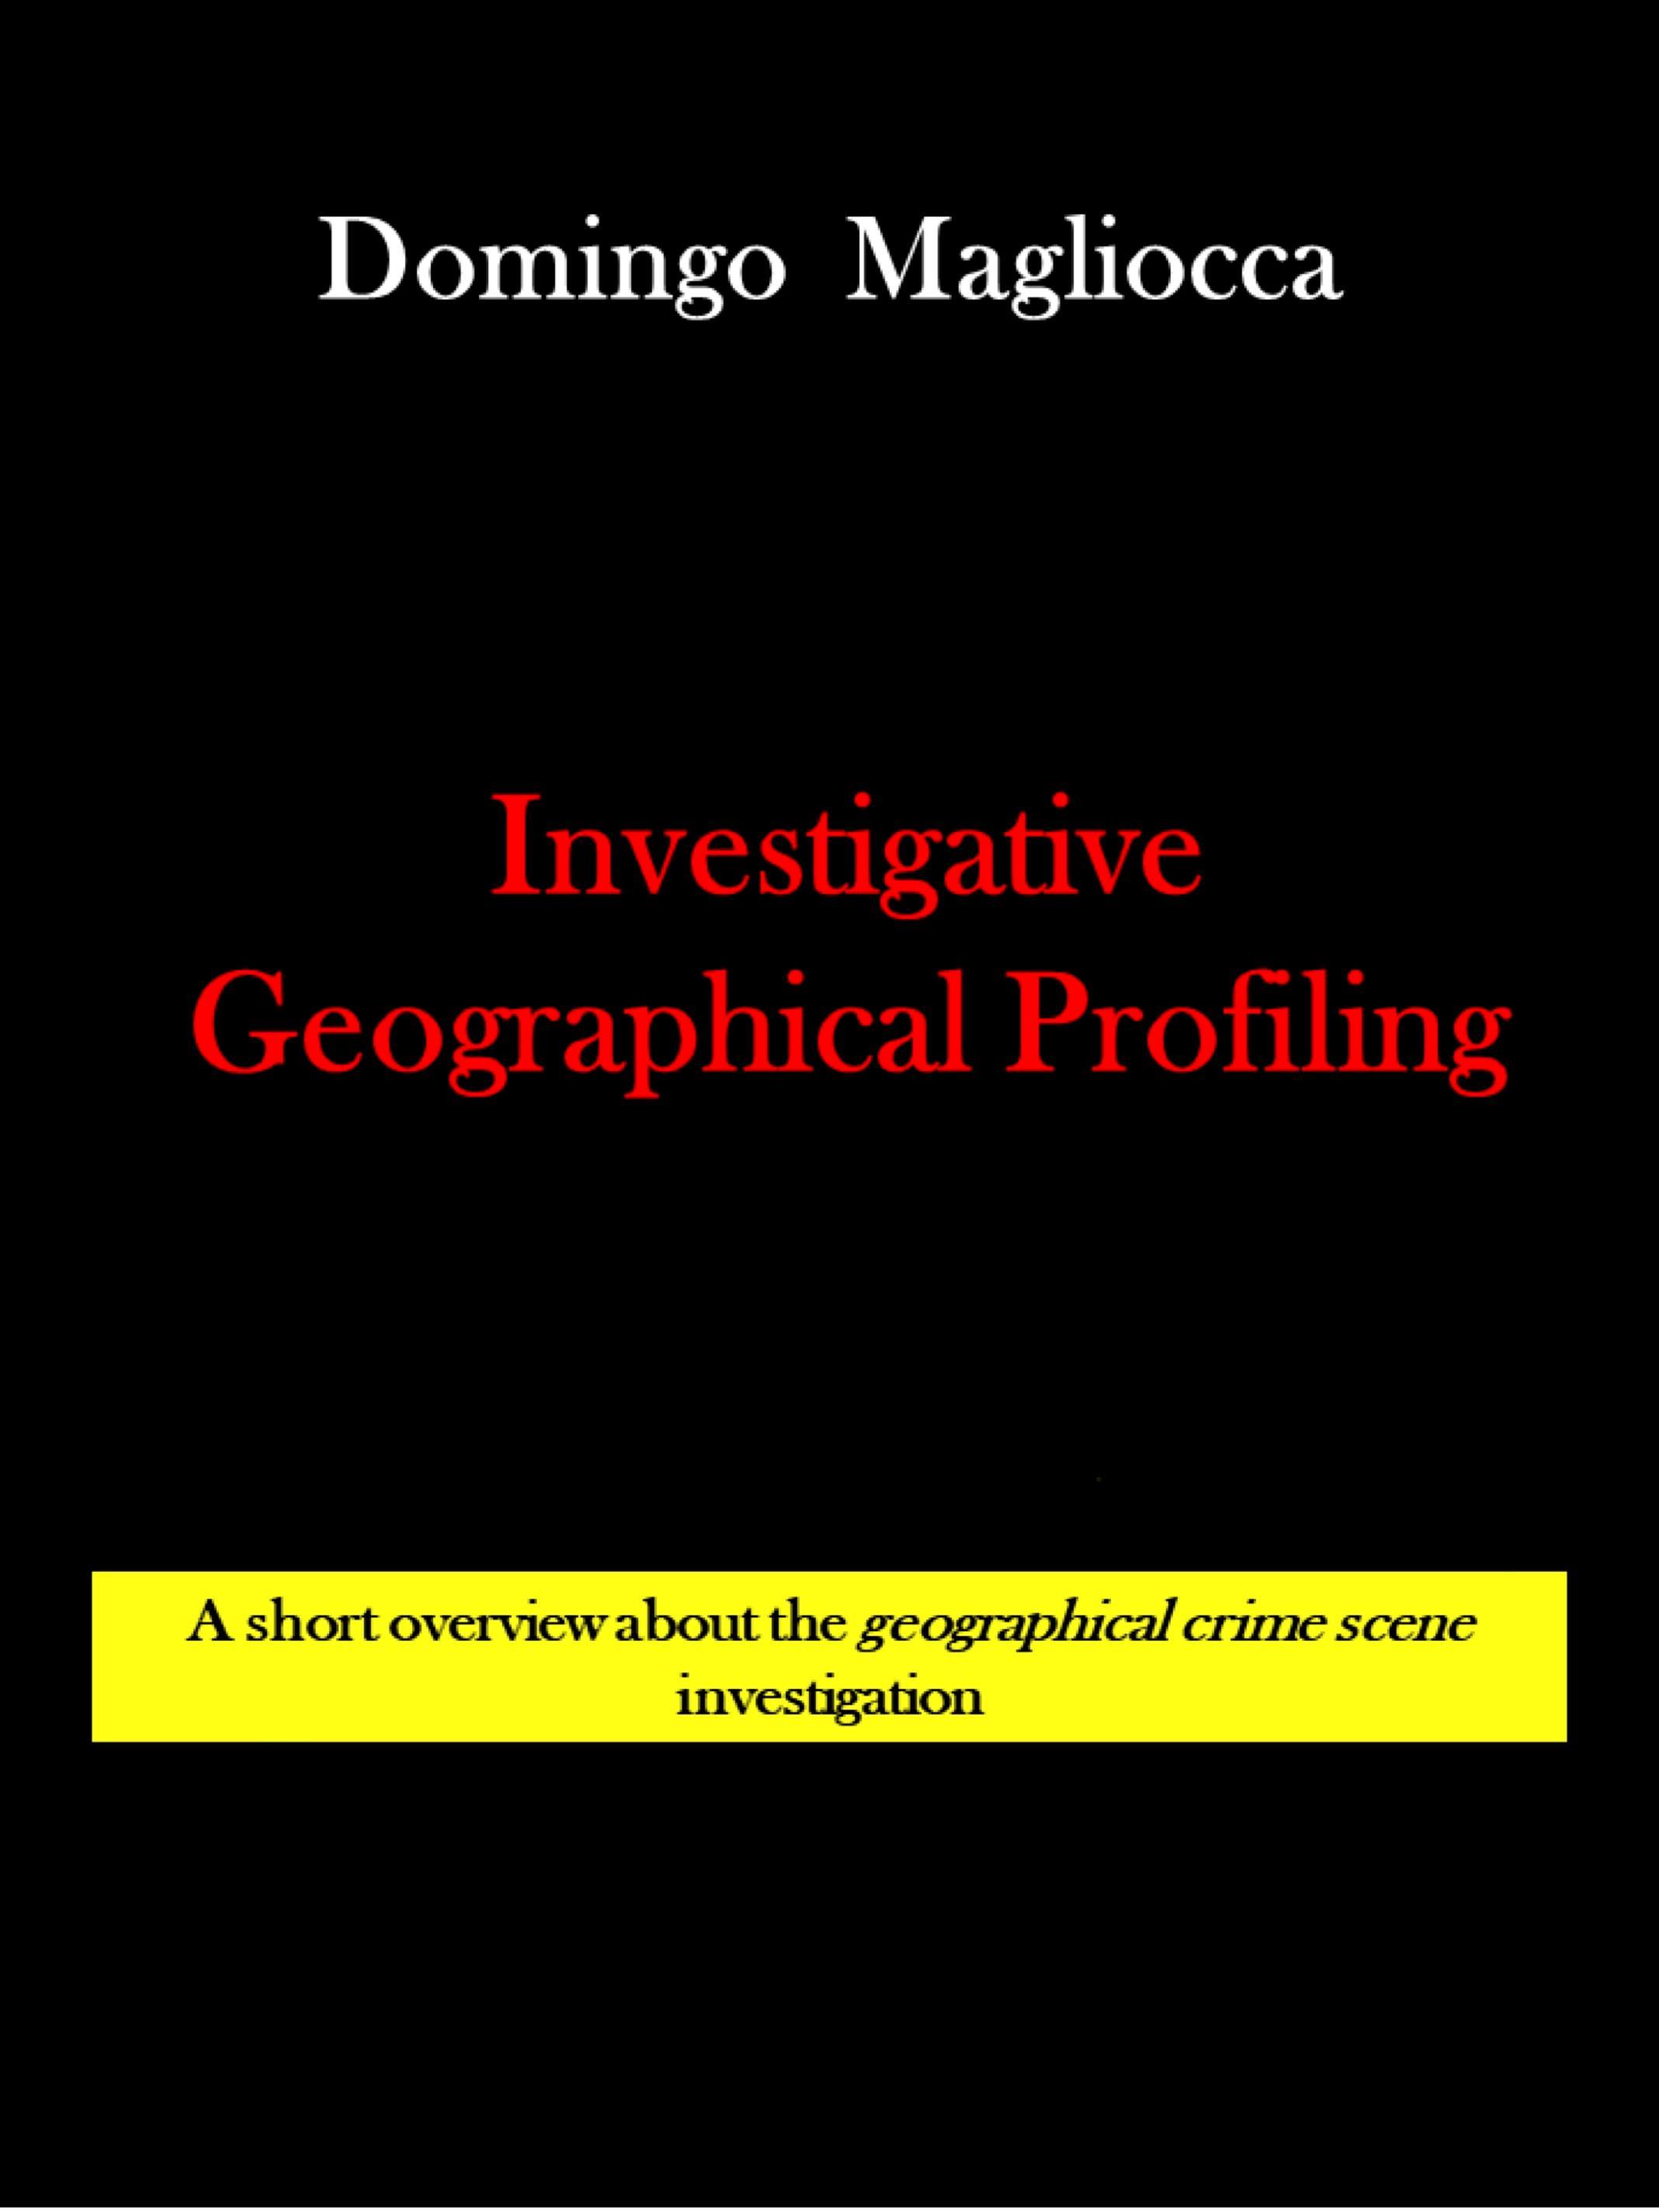 INVESTIGATIVE GEOGRAPHICAL PROFILING. A short overview about the geographical crime scene investigation